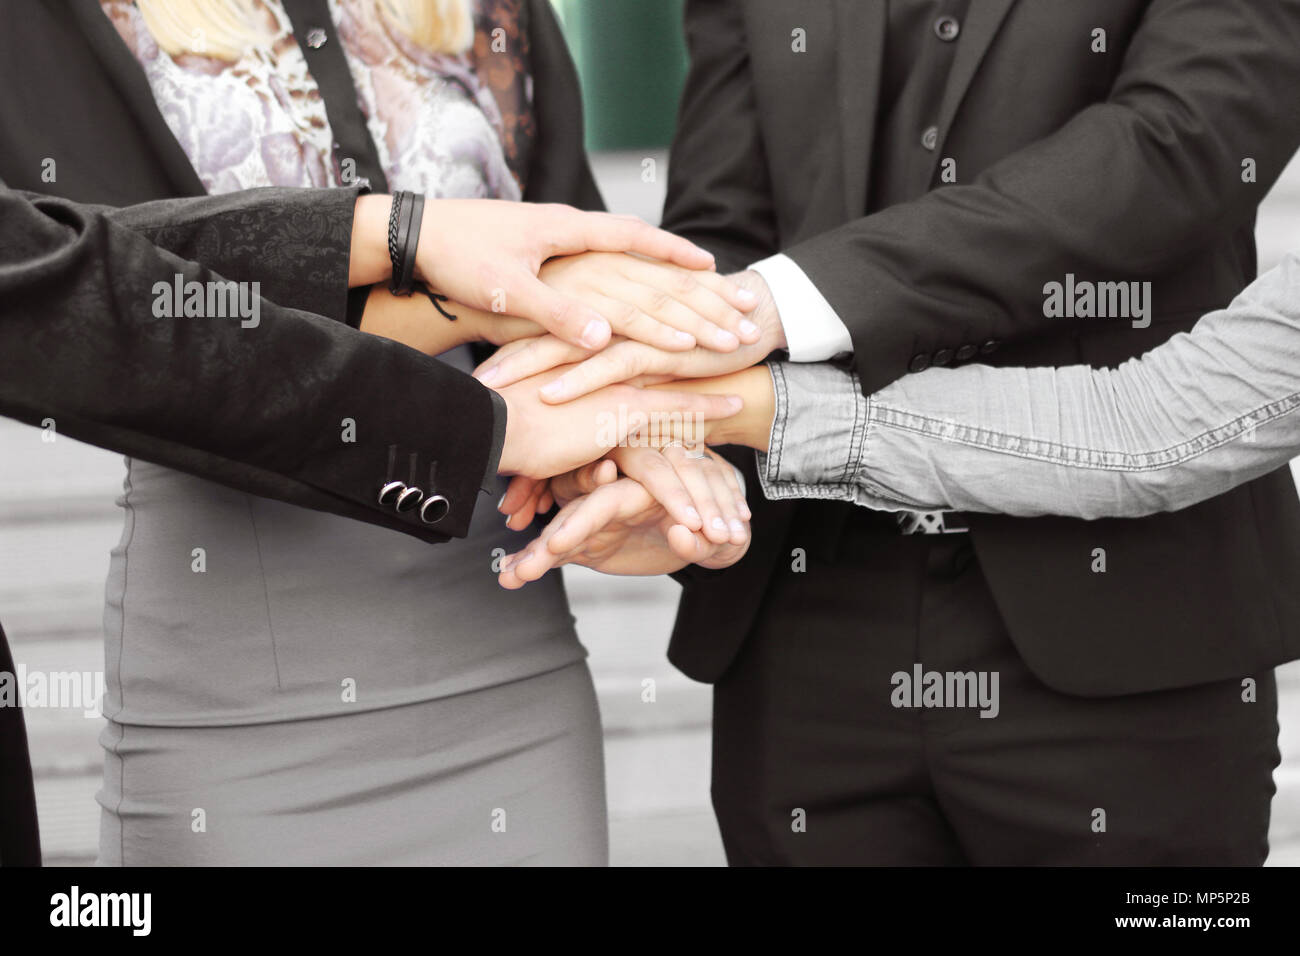 business people folding their hands together.concept of teamwork Stock Photo